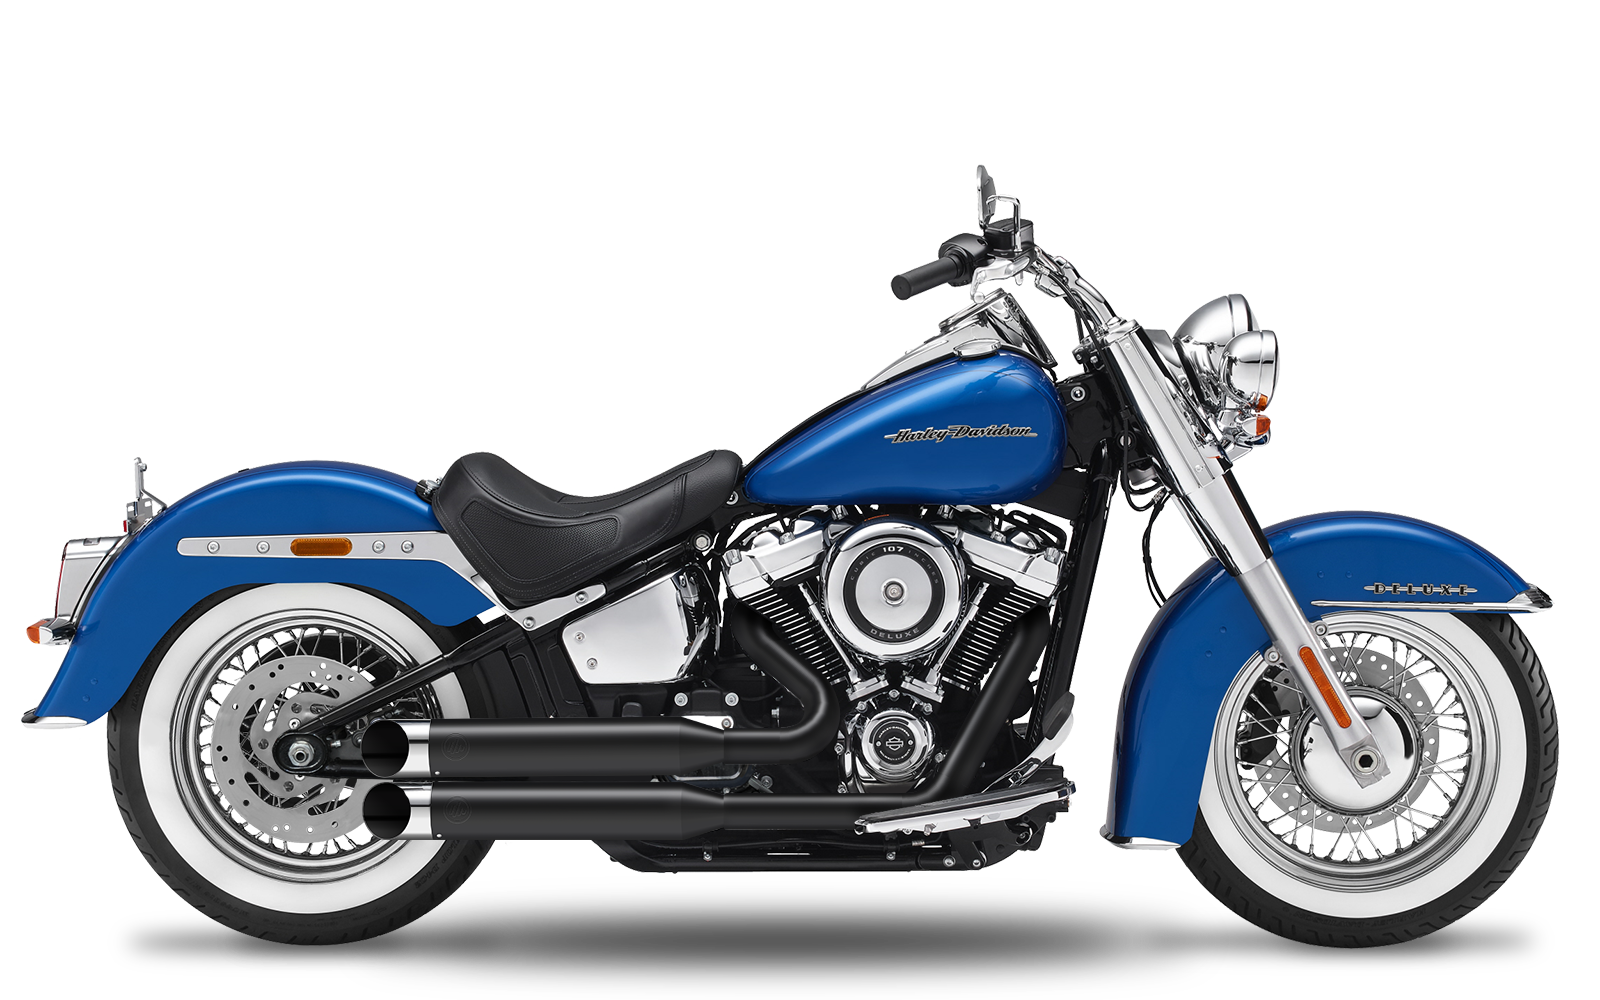 CRUISER/SOFTAIL - Deluxe - ME107 - 2018-2020 - Pro-Line Complete systems adjustable